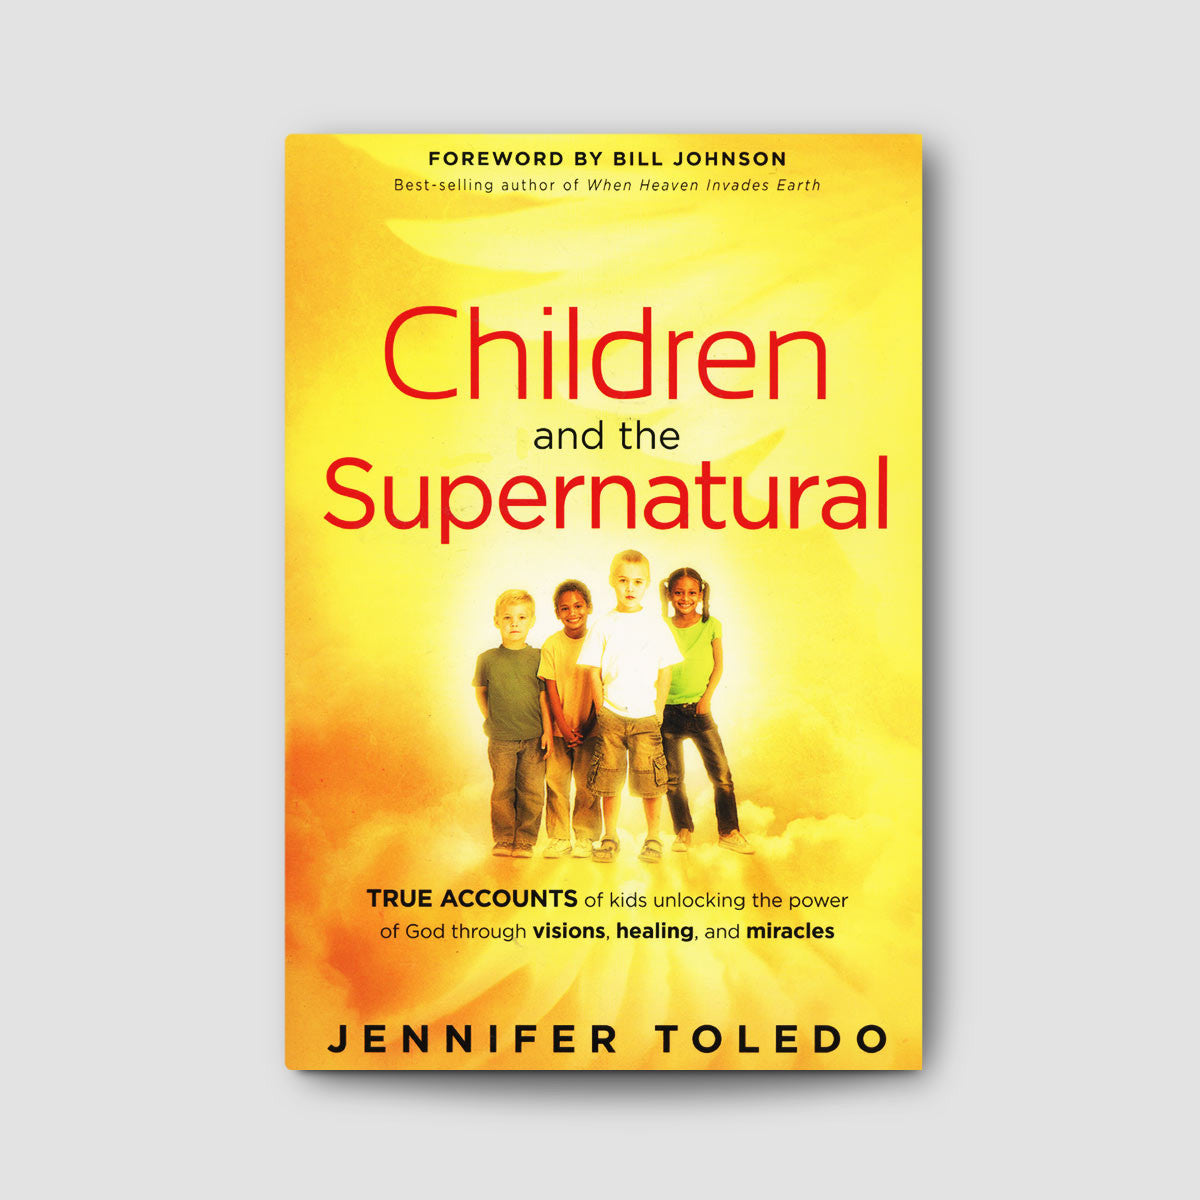 Children and the Supernatural